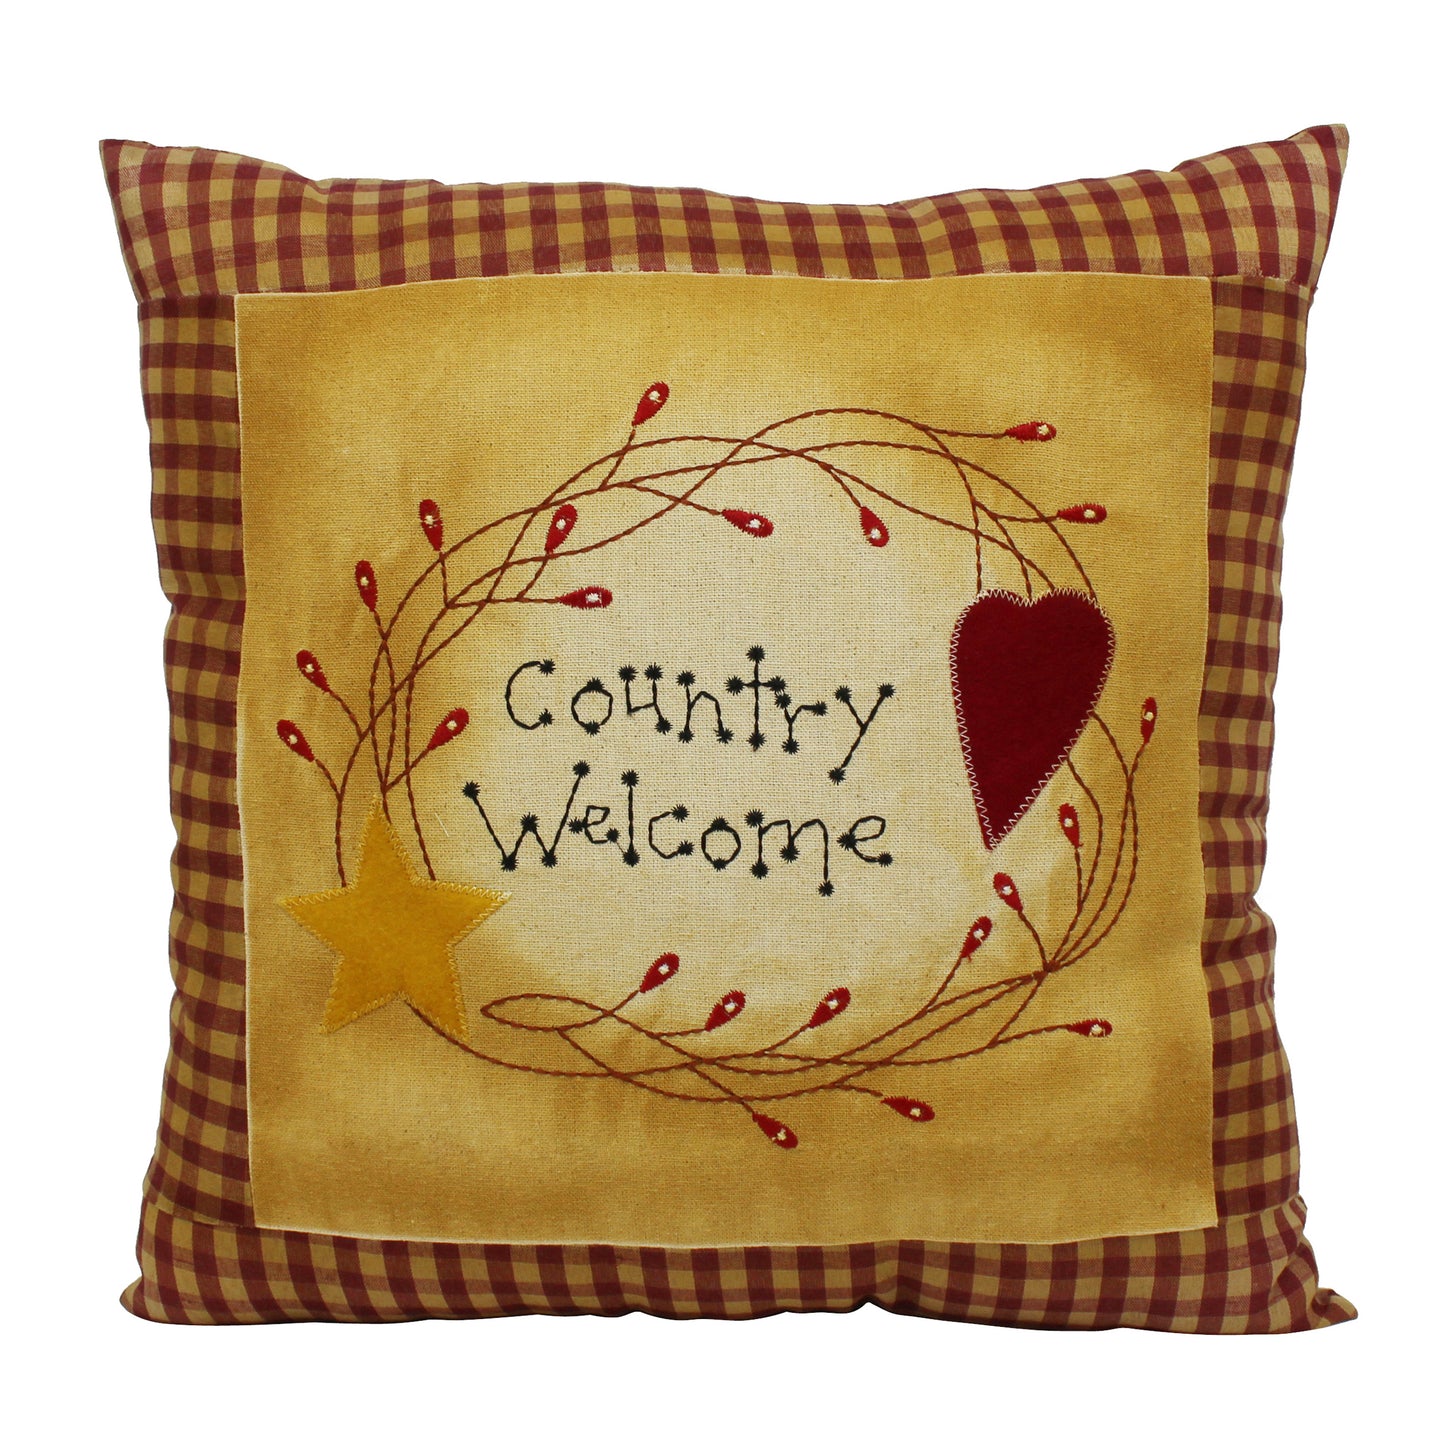 CVHOMEDECO. Primitives Country Welcome Embroidered Throw Pillow with Heart Star Berry Vine Farmhouse Accent. 16 x 16 Inch